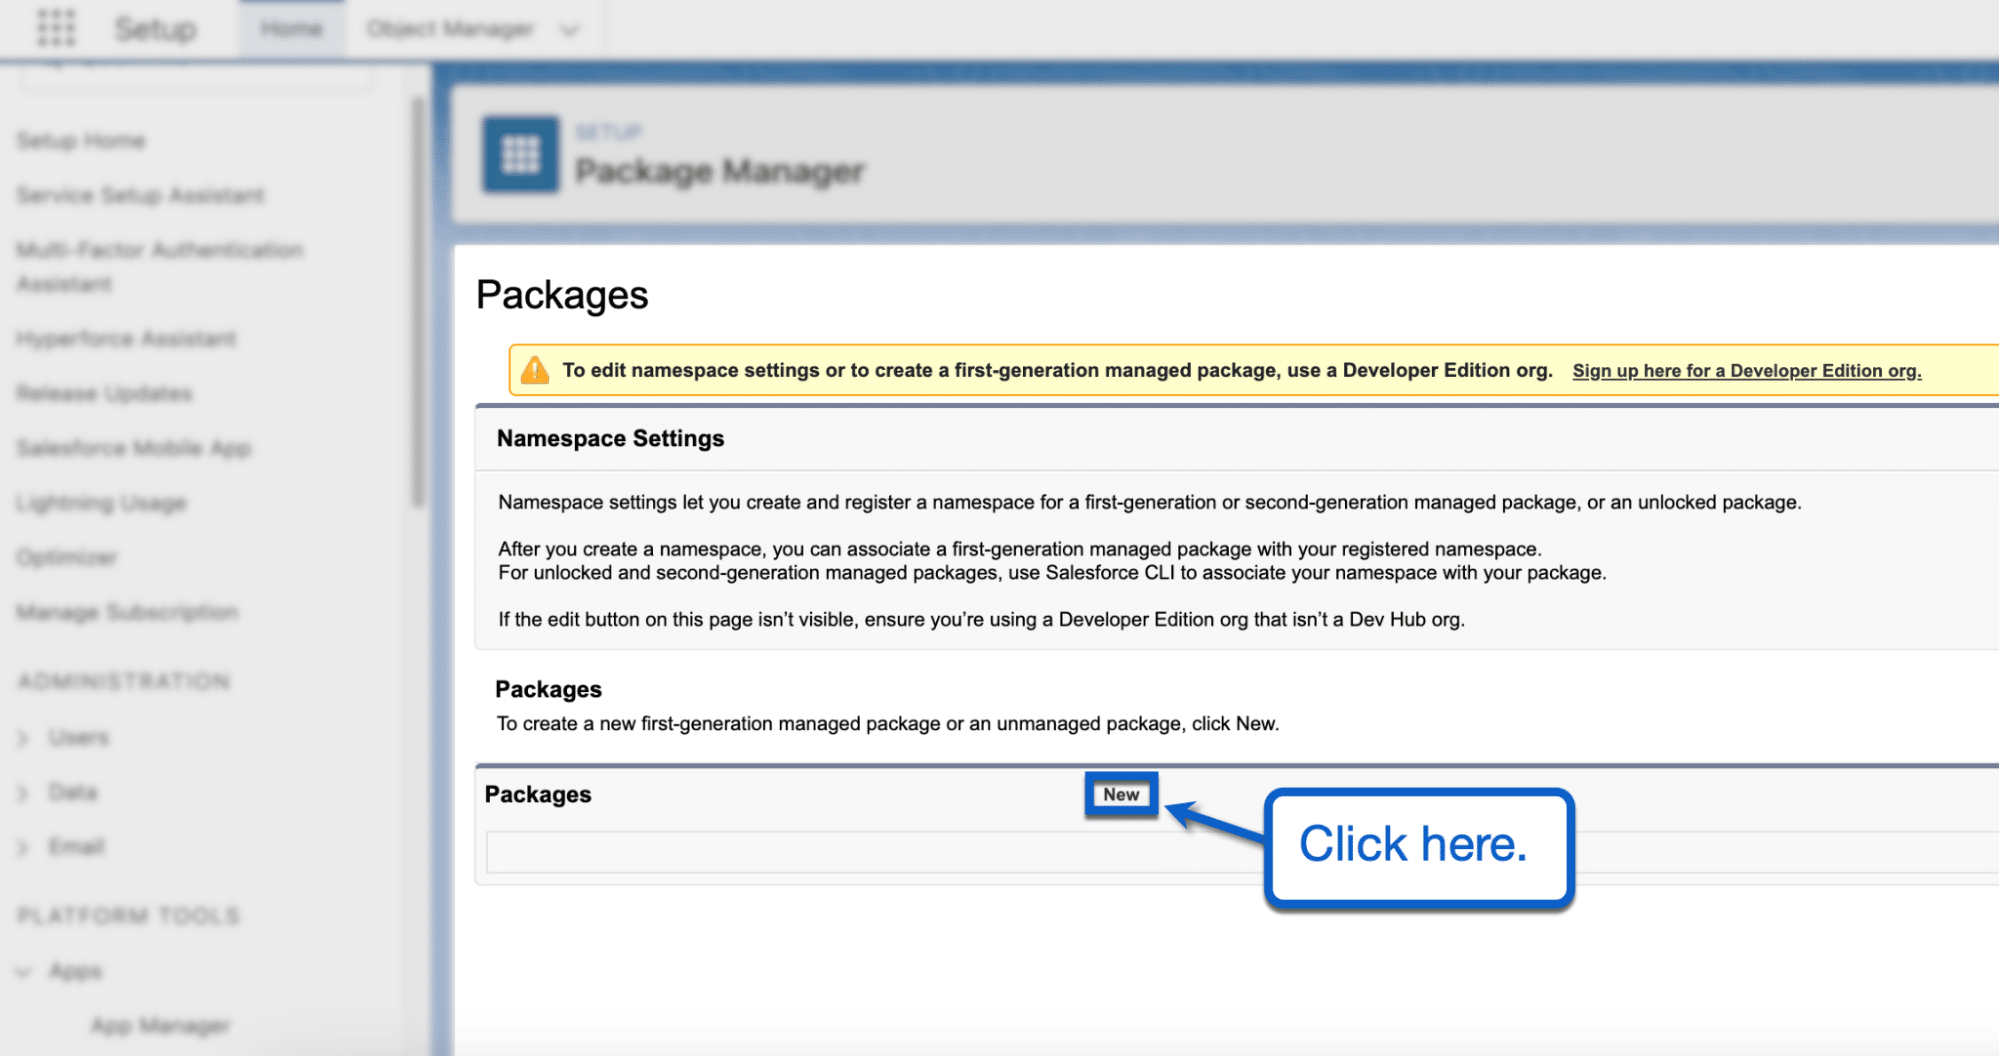  Click ' New ' in the "Packages" list to get started. 